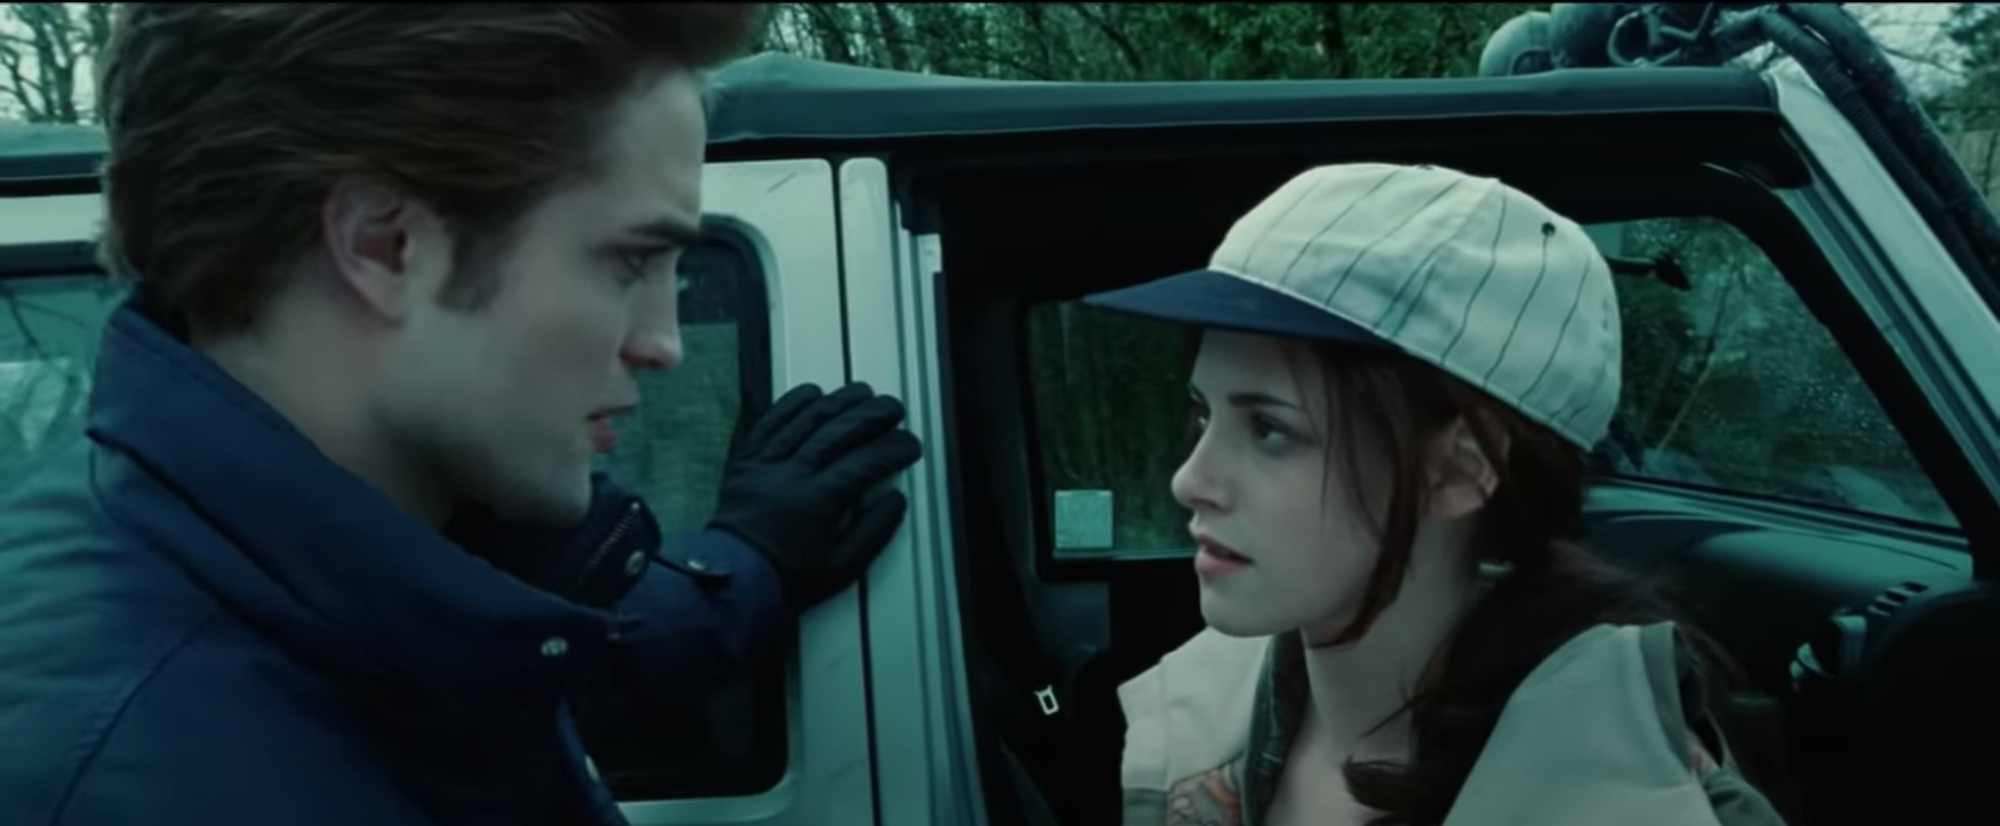 Edward Cullen (Robert Pattinson) and Bella Swan (Kristen Stewart) right before the Cullens have their baseball game in 'Twilight.'